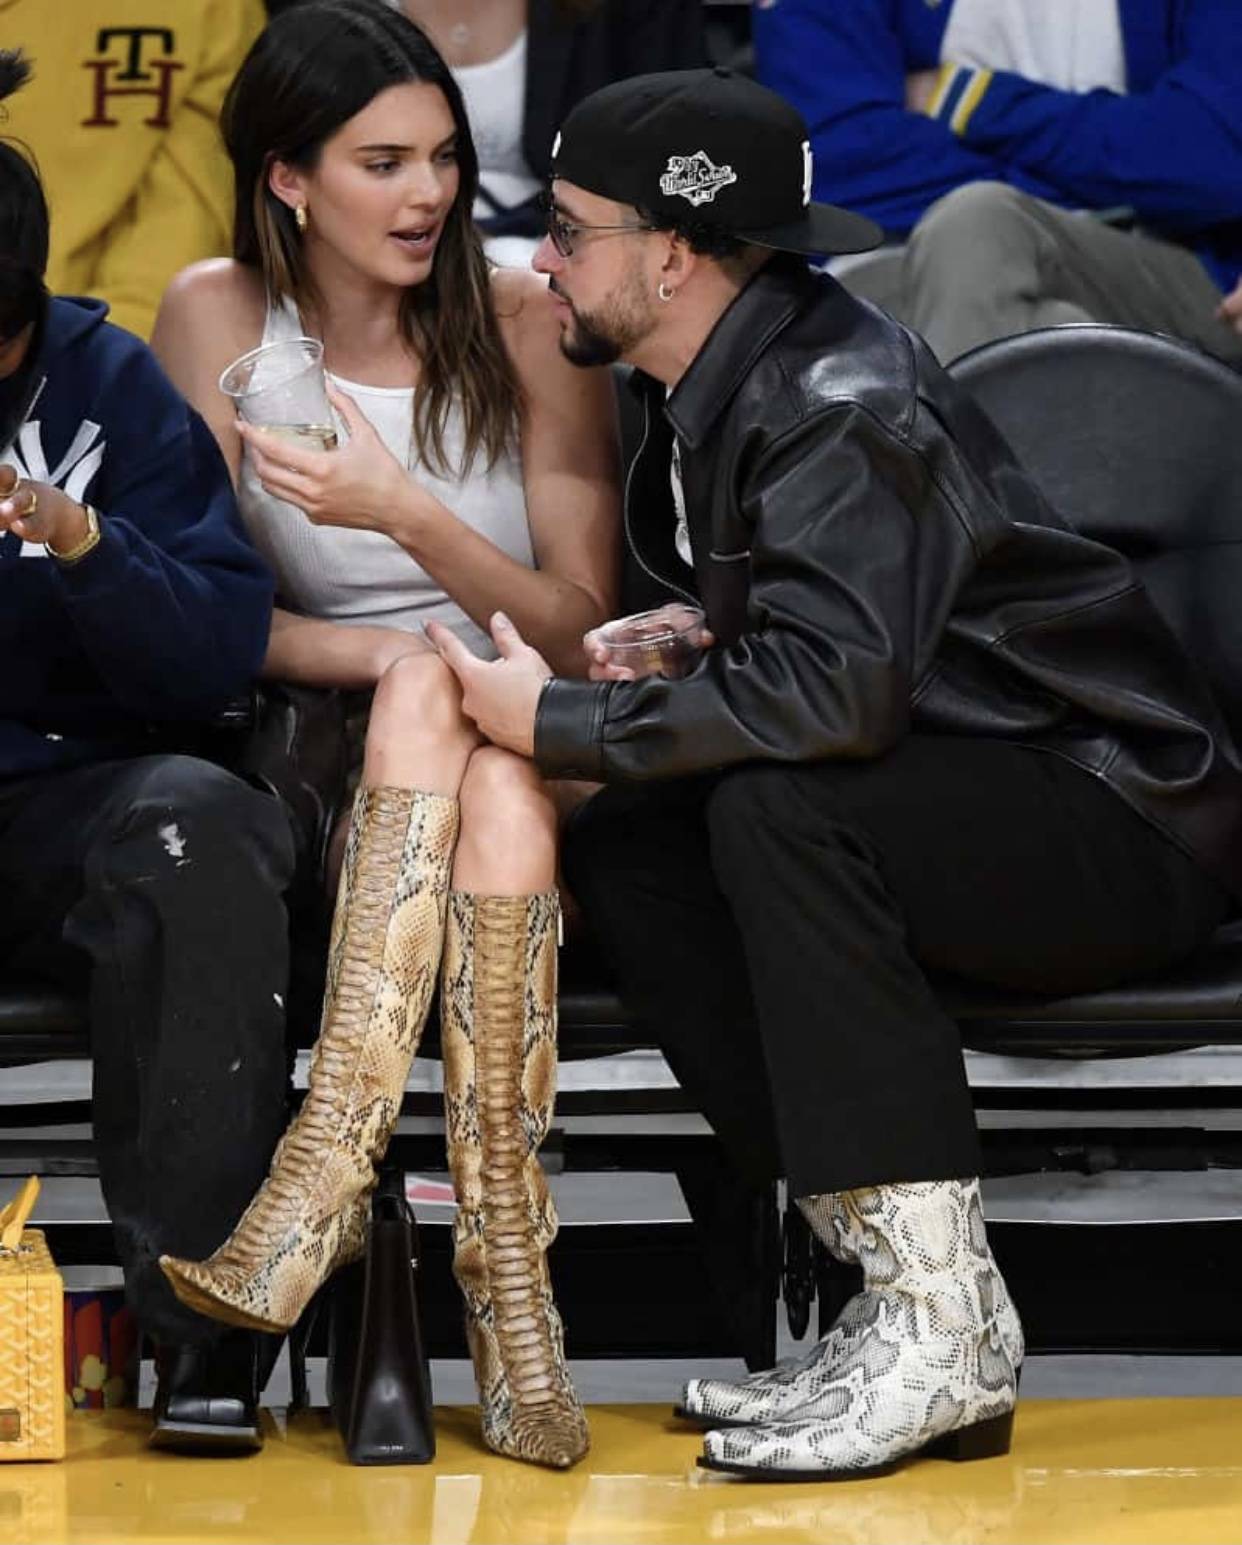 Kendall Jenner and Bad Bunny Take Their Relationship to the Next Level